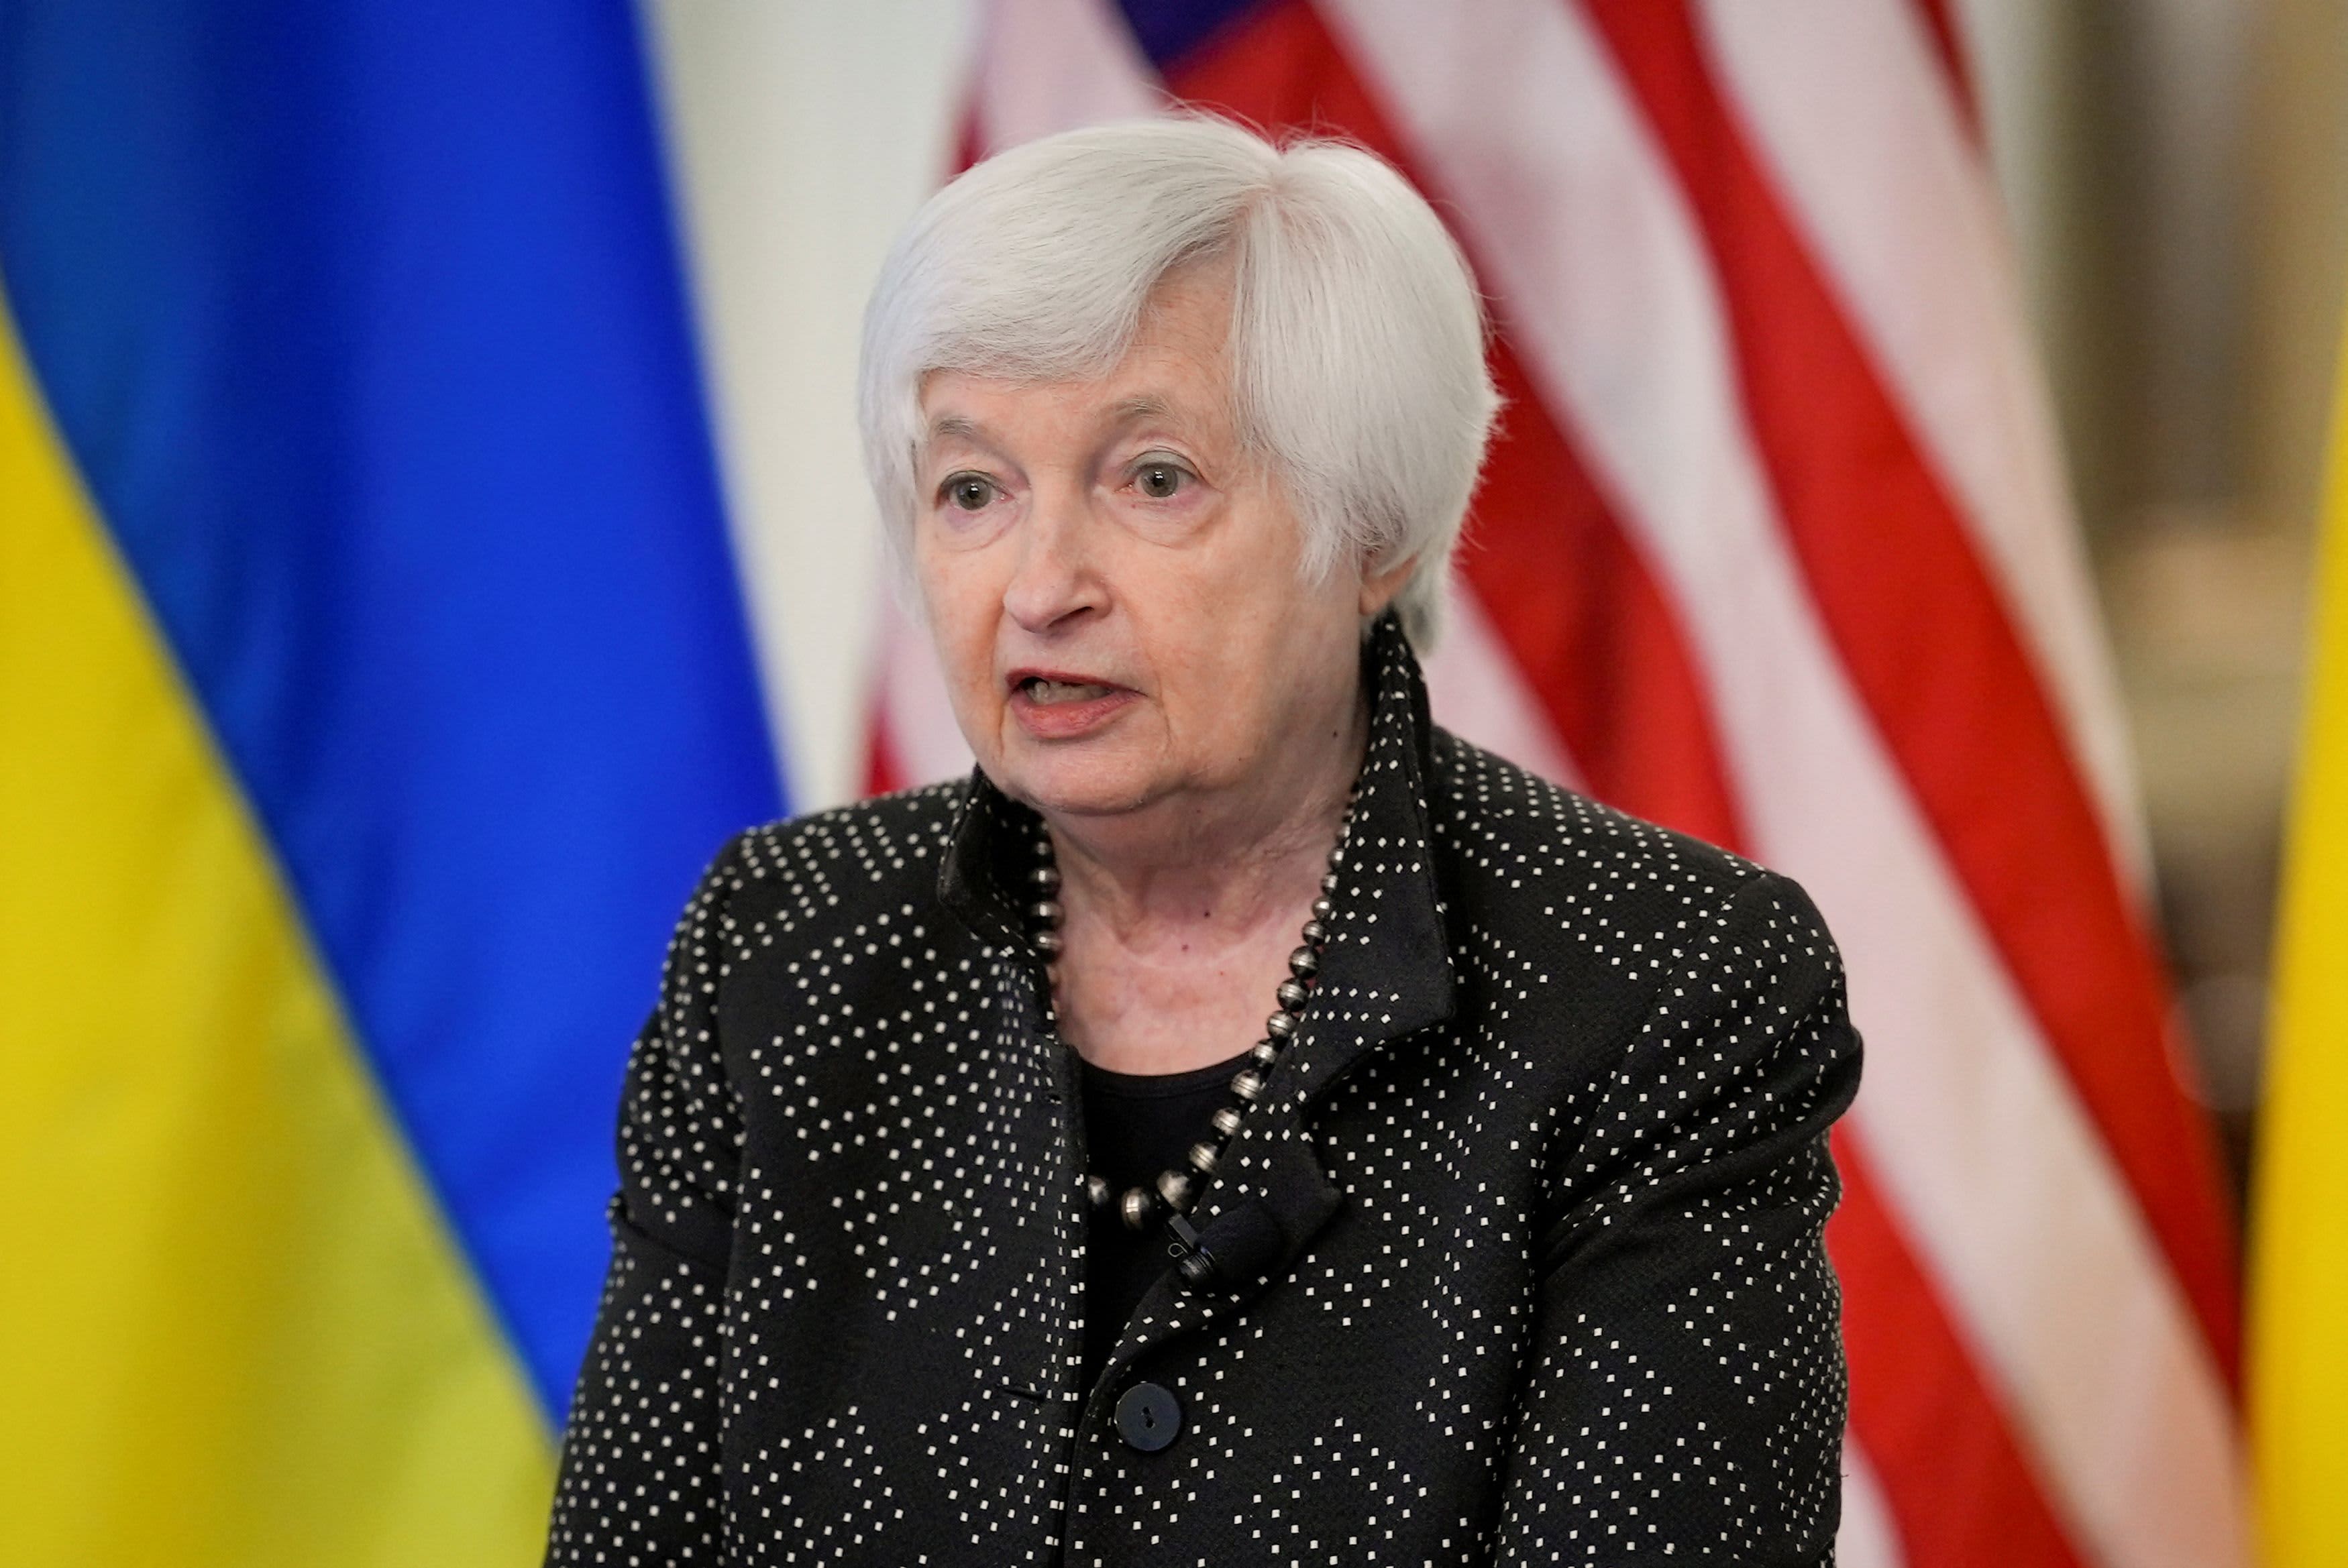 Yellen says that “difficult choices” must be made if the debt ceiling is not raised